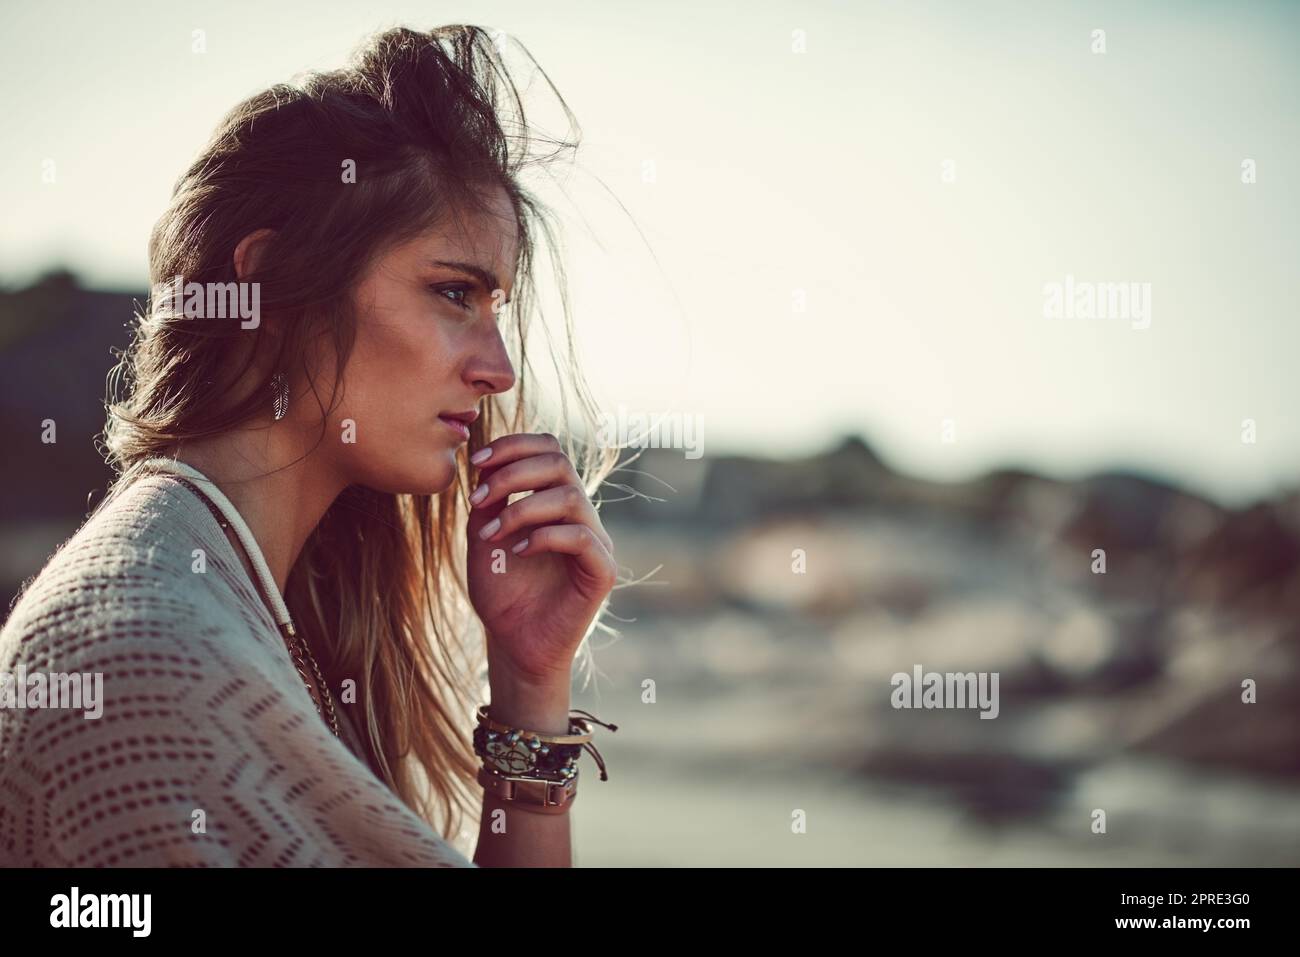 The beach is a great place to find inner peace. an attractive young woman spending a day at the beach. Stock Photo